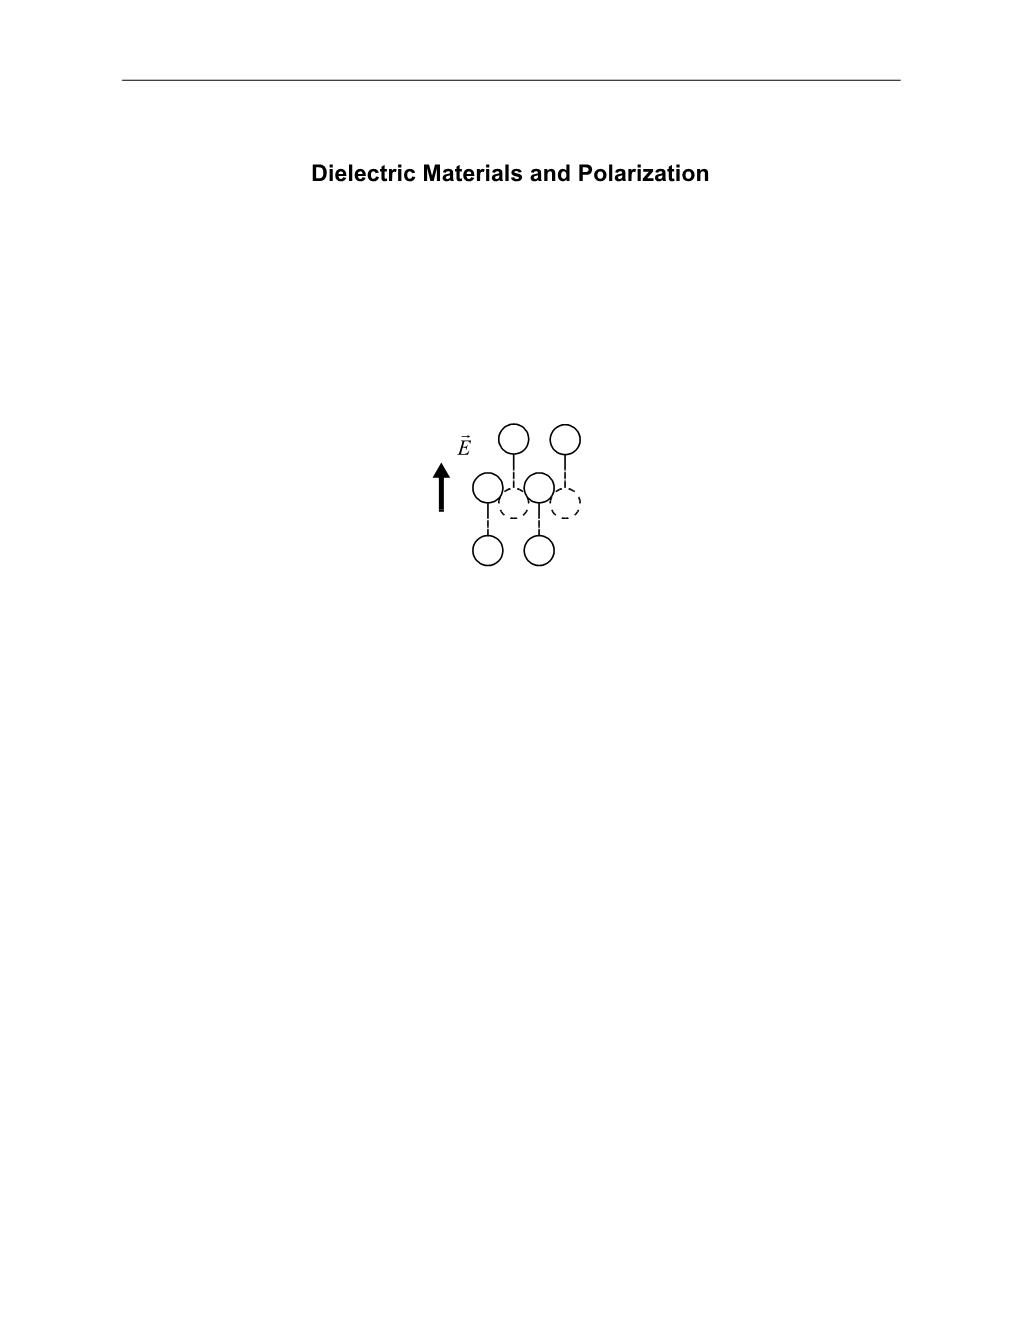 Dielectric Materials and Polarization Chapter 6